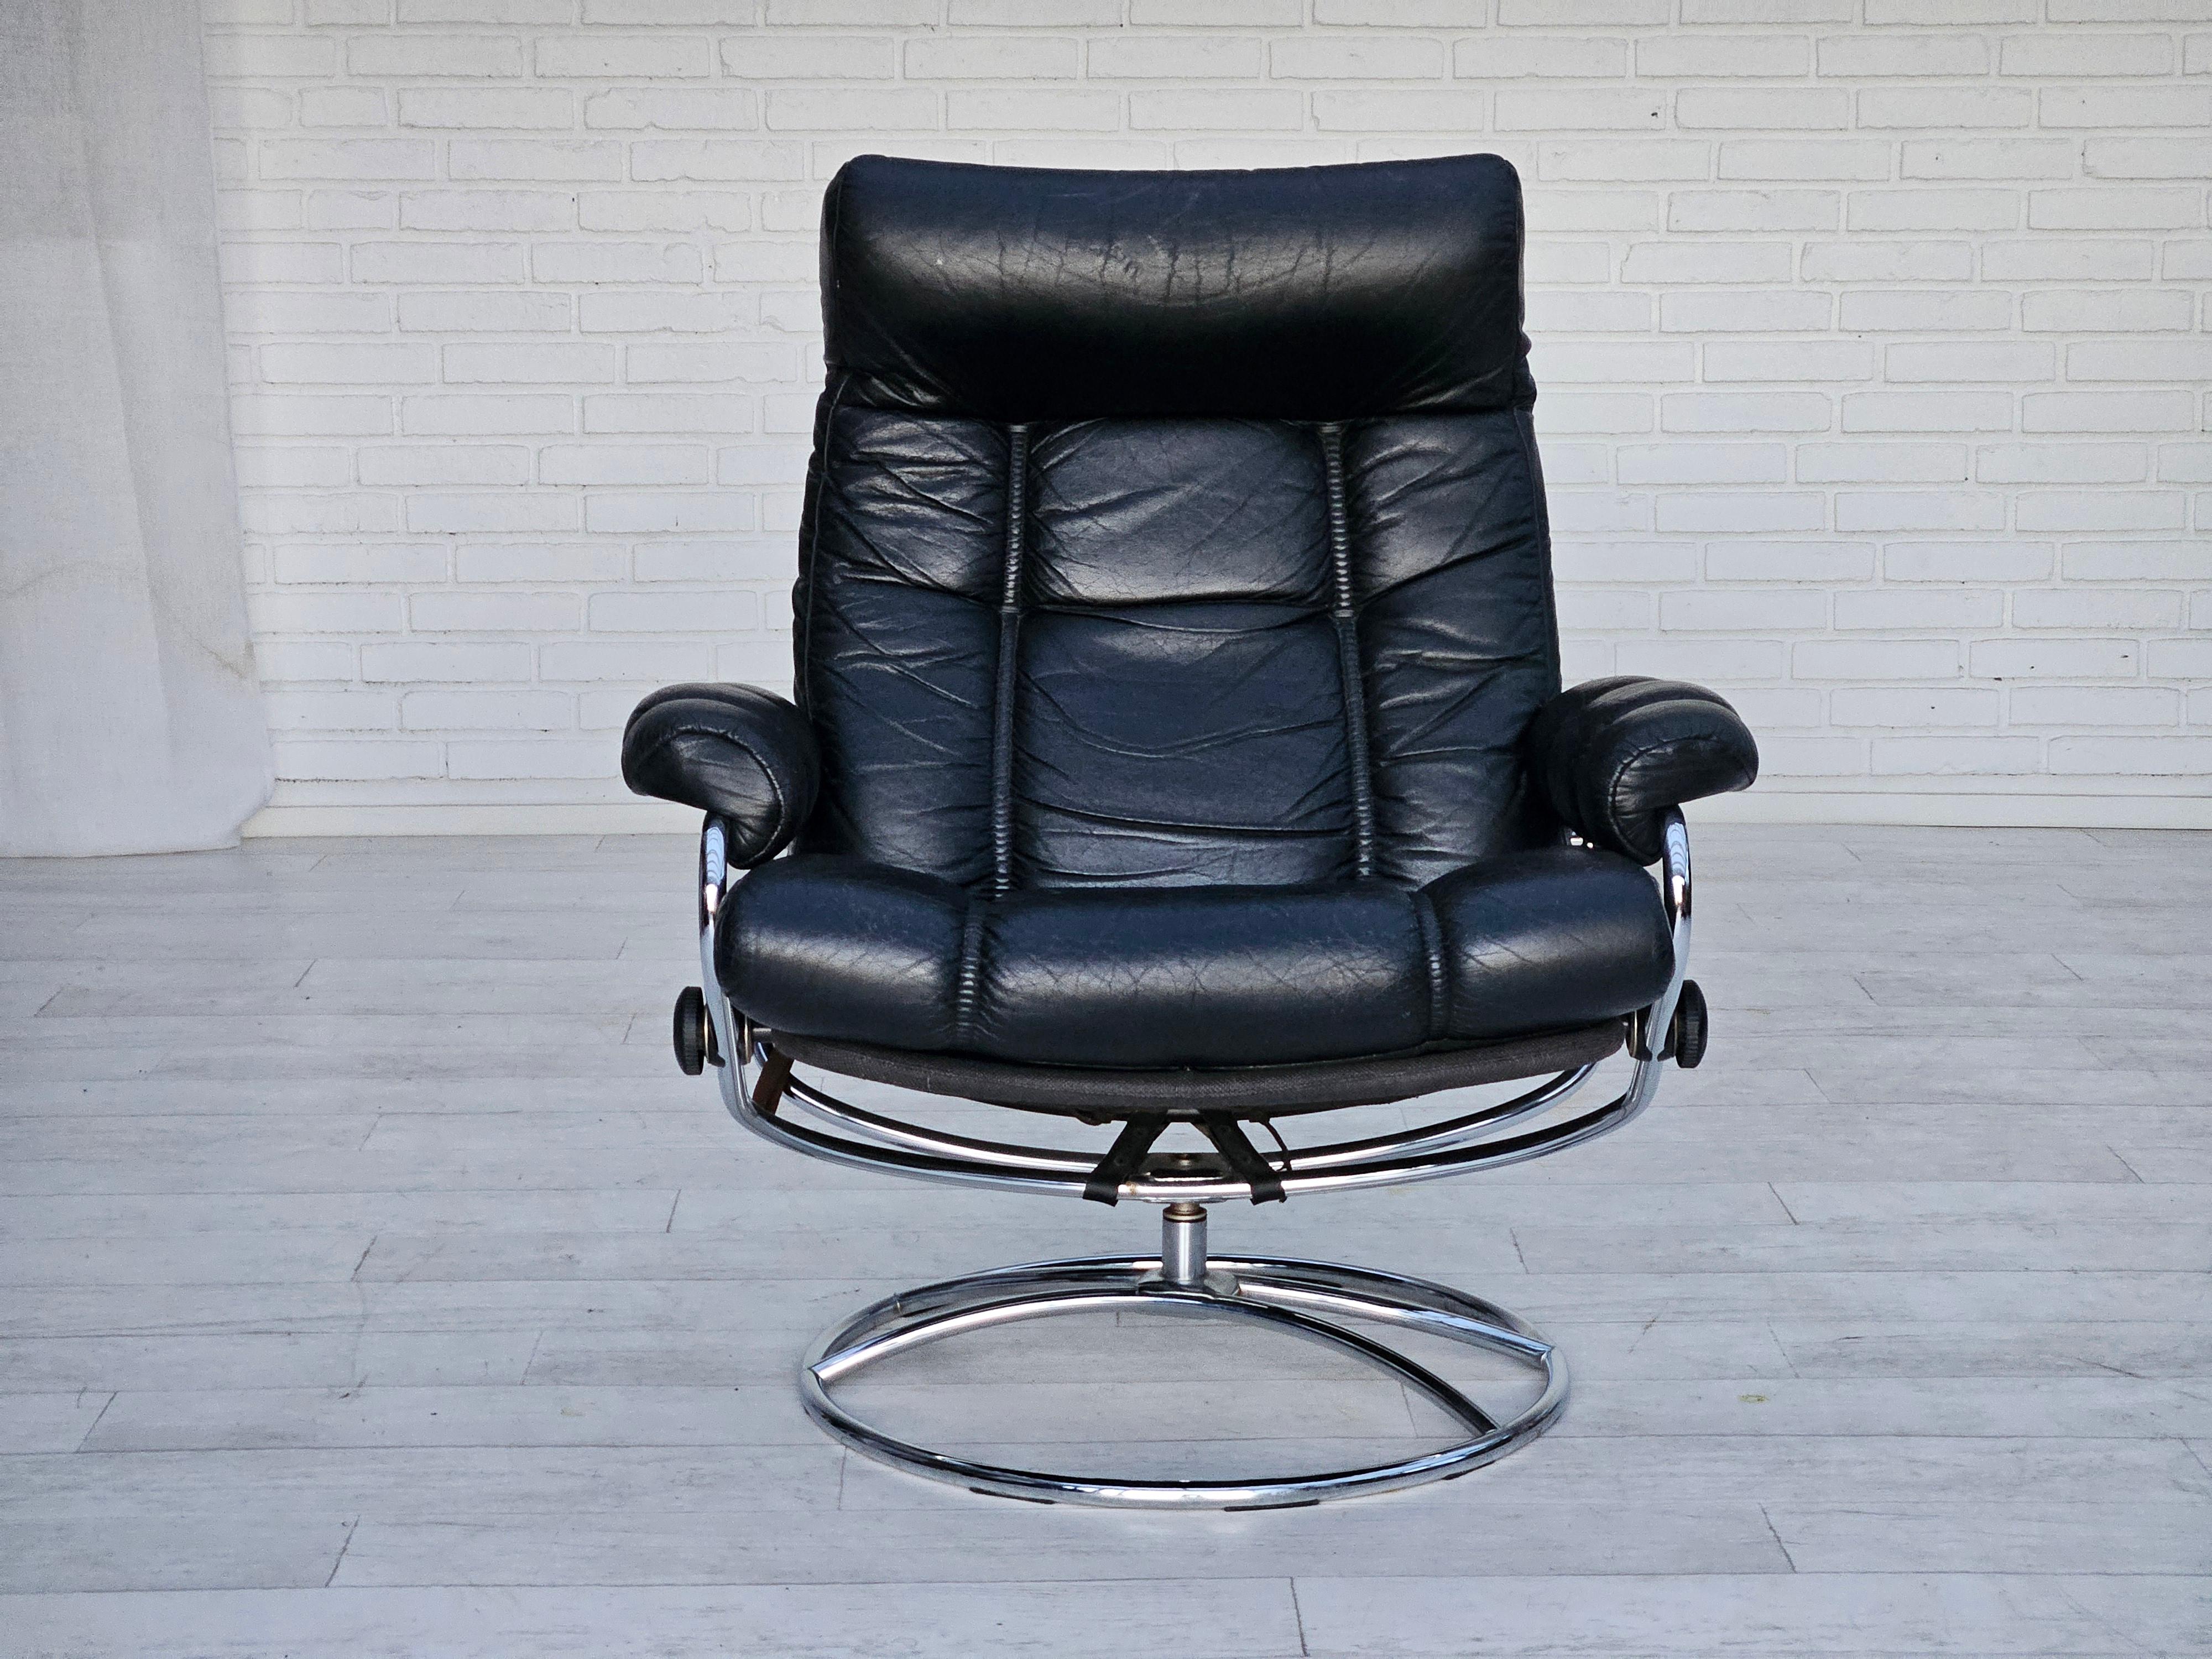 1970s, Norwegian relax swivel chair by Stressless, original very good condition. 4